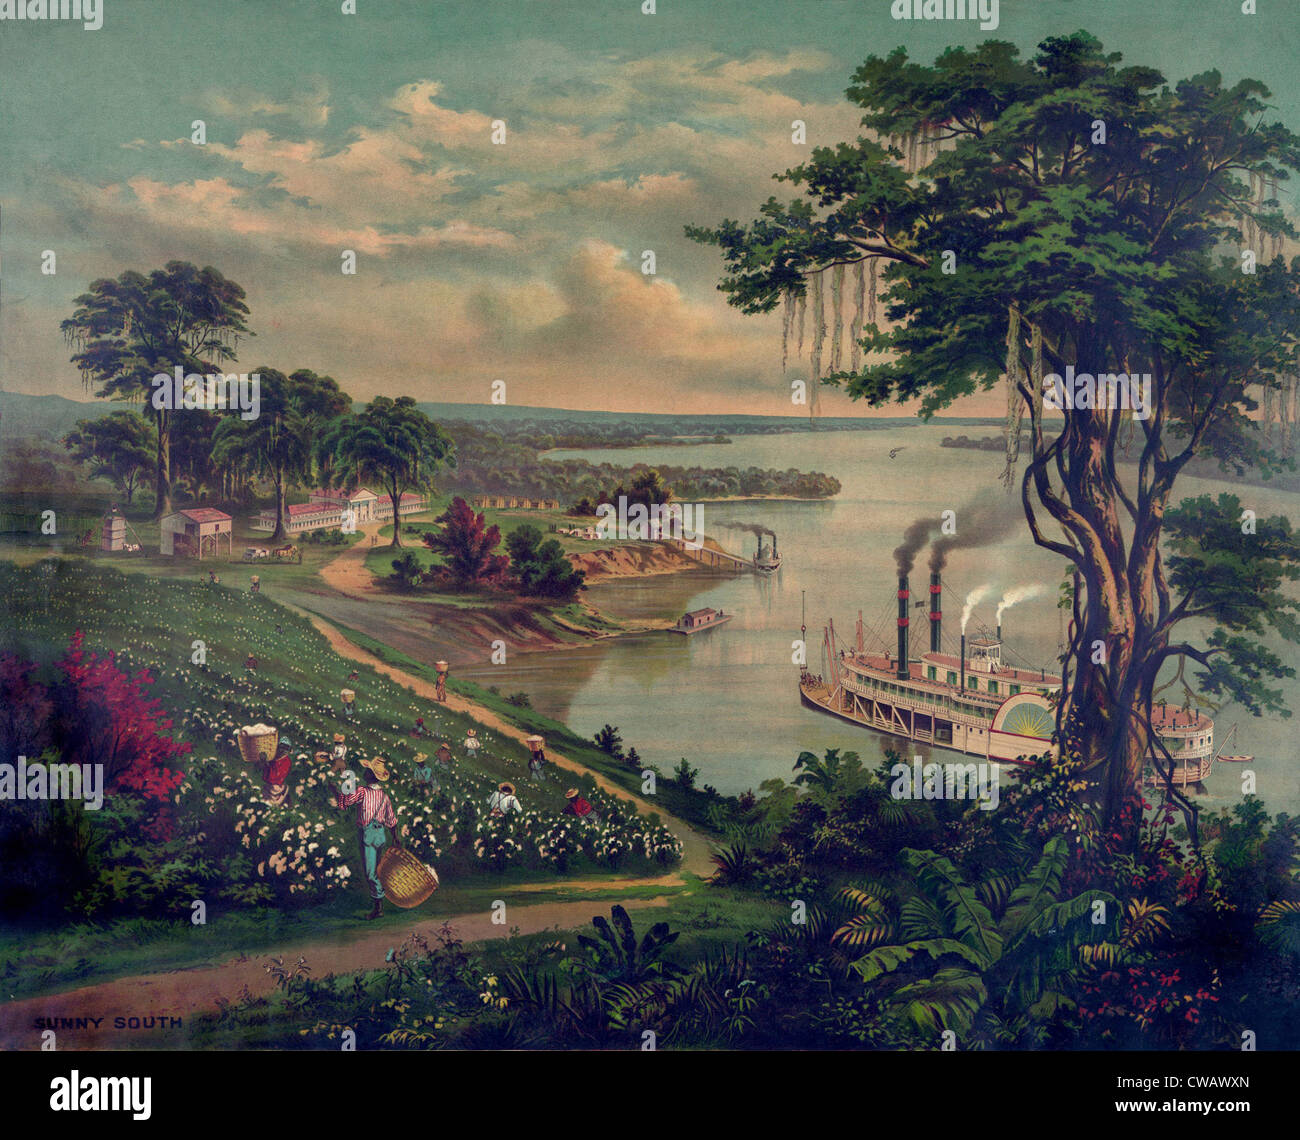 Idealized view of a plantation in the 'Sunny South', with African Americans picking cotton. The plantation has a cotton gin and Stock Photo